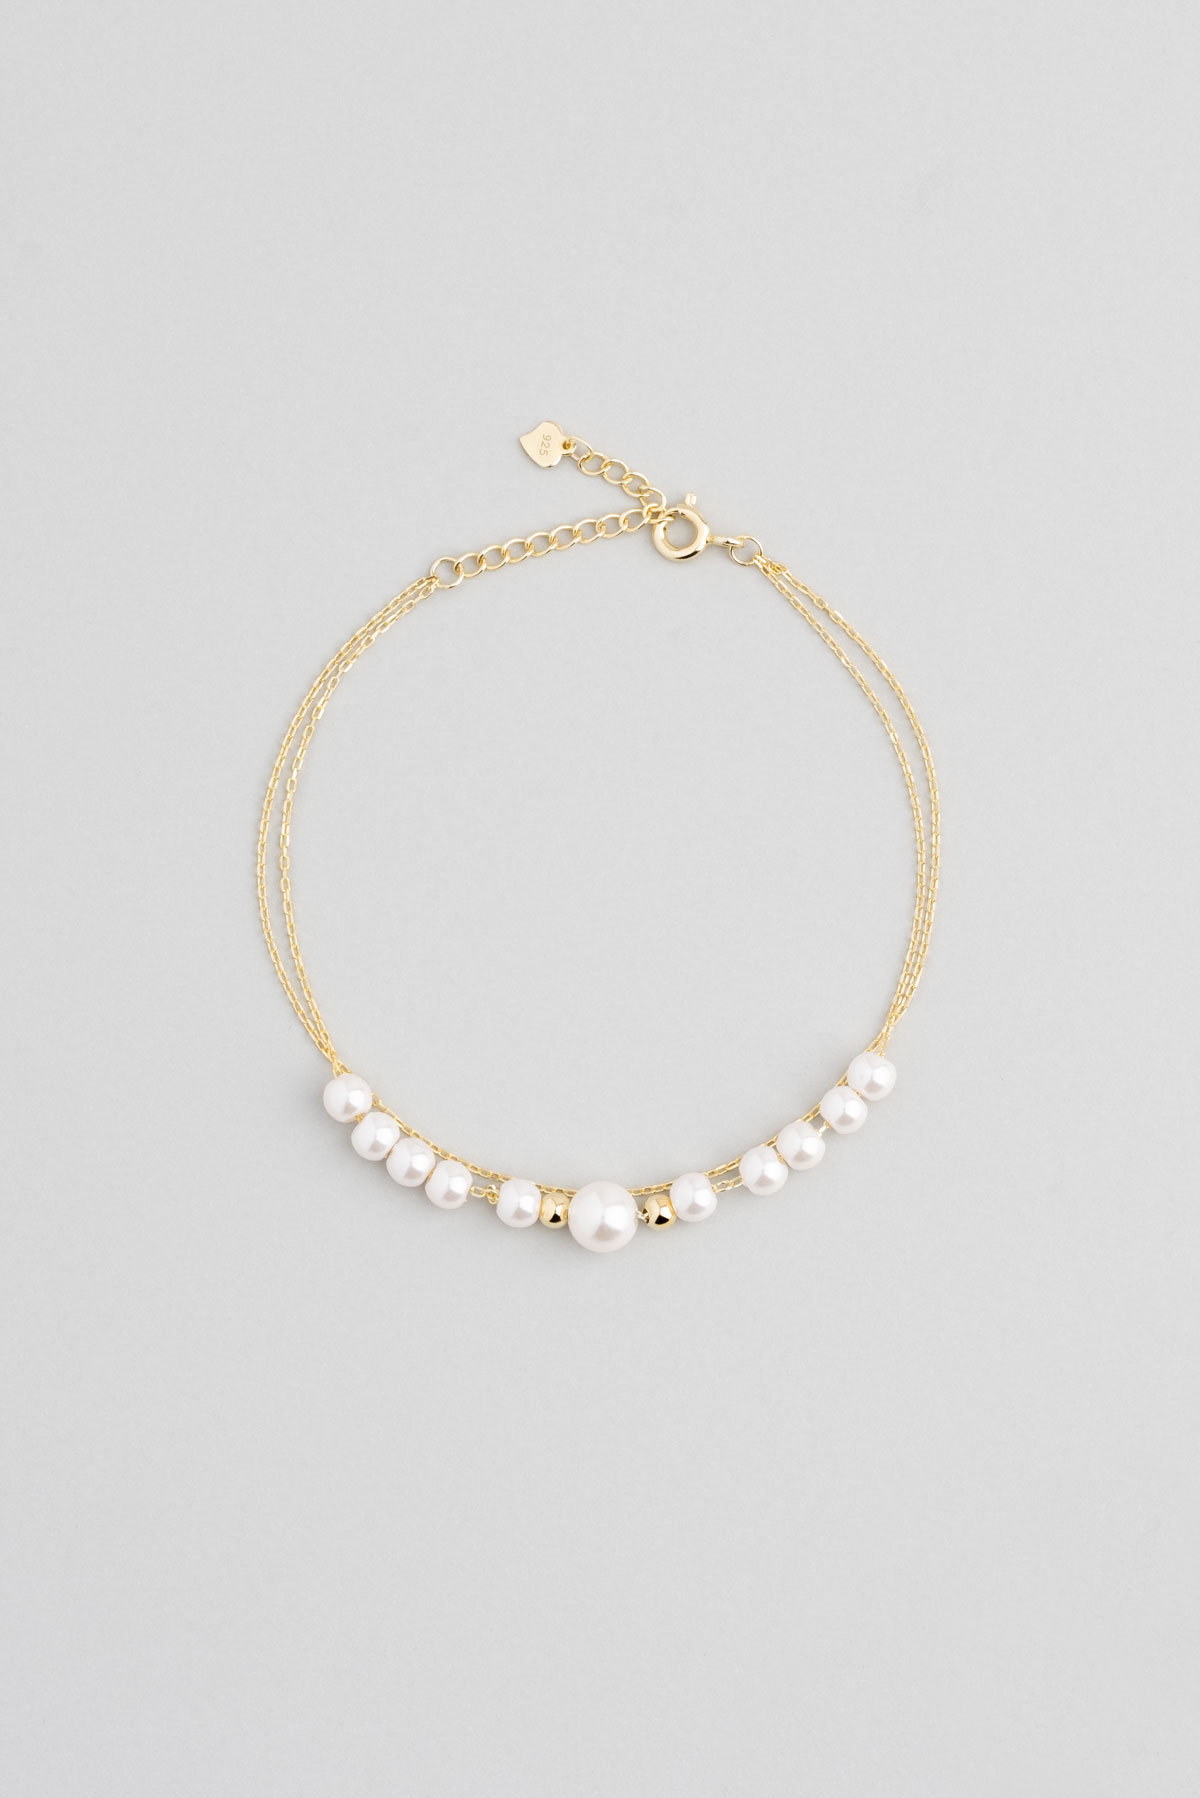 18 Carat Yellow Gold Plated Silver Bracelet with Pearl Stone